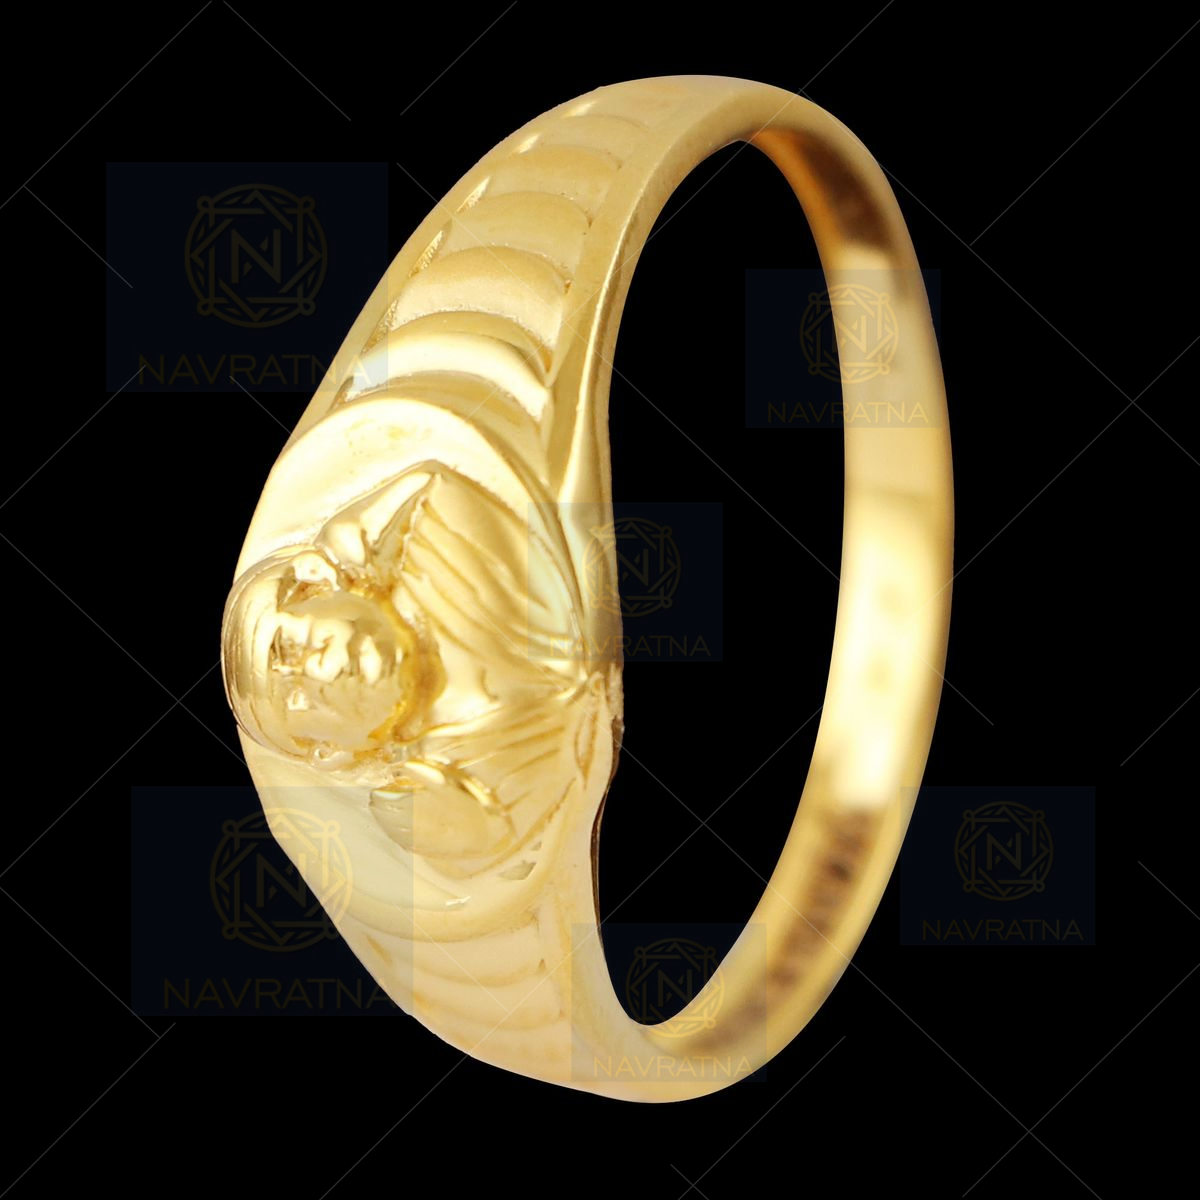 Buy 22Kt Sai Baba Gold Ring For Kids 93VE1140 Online from Vaibhav Jewellers